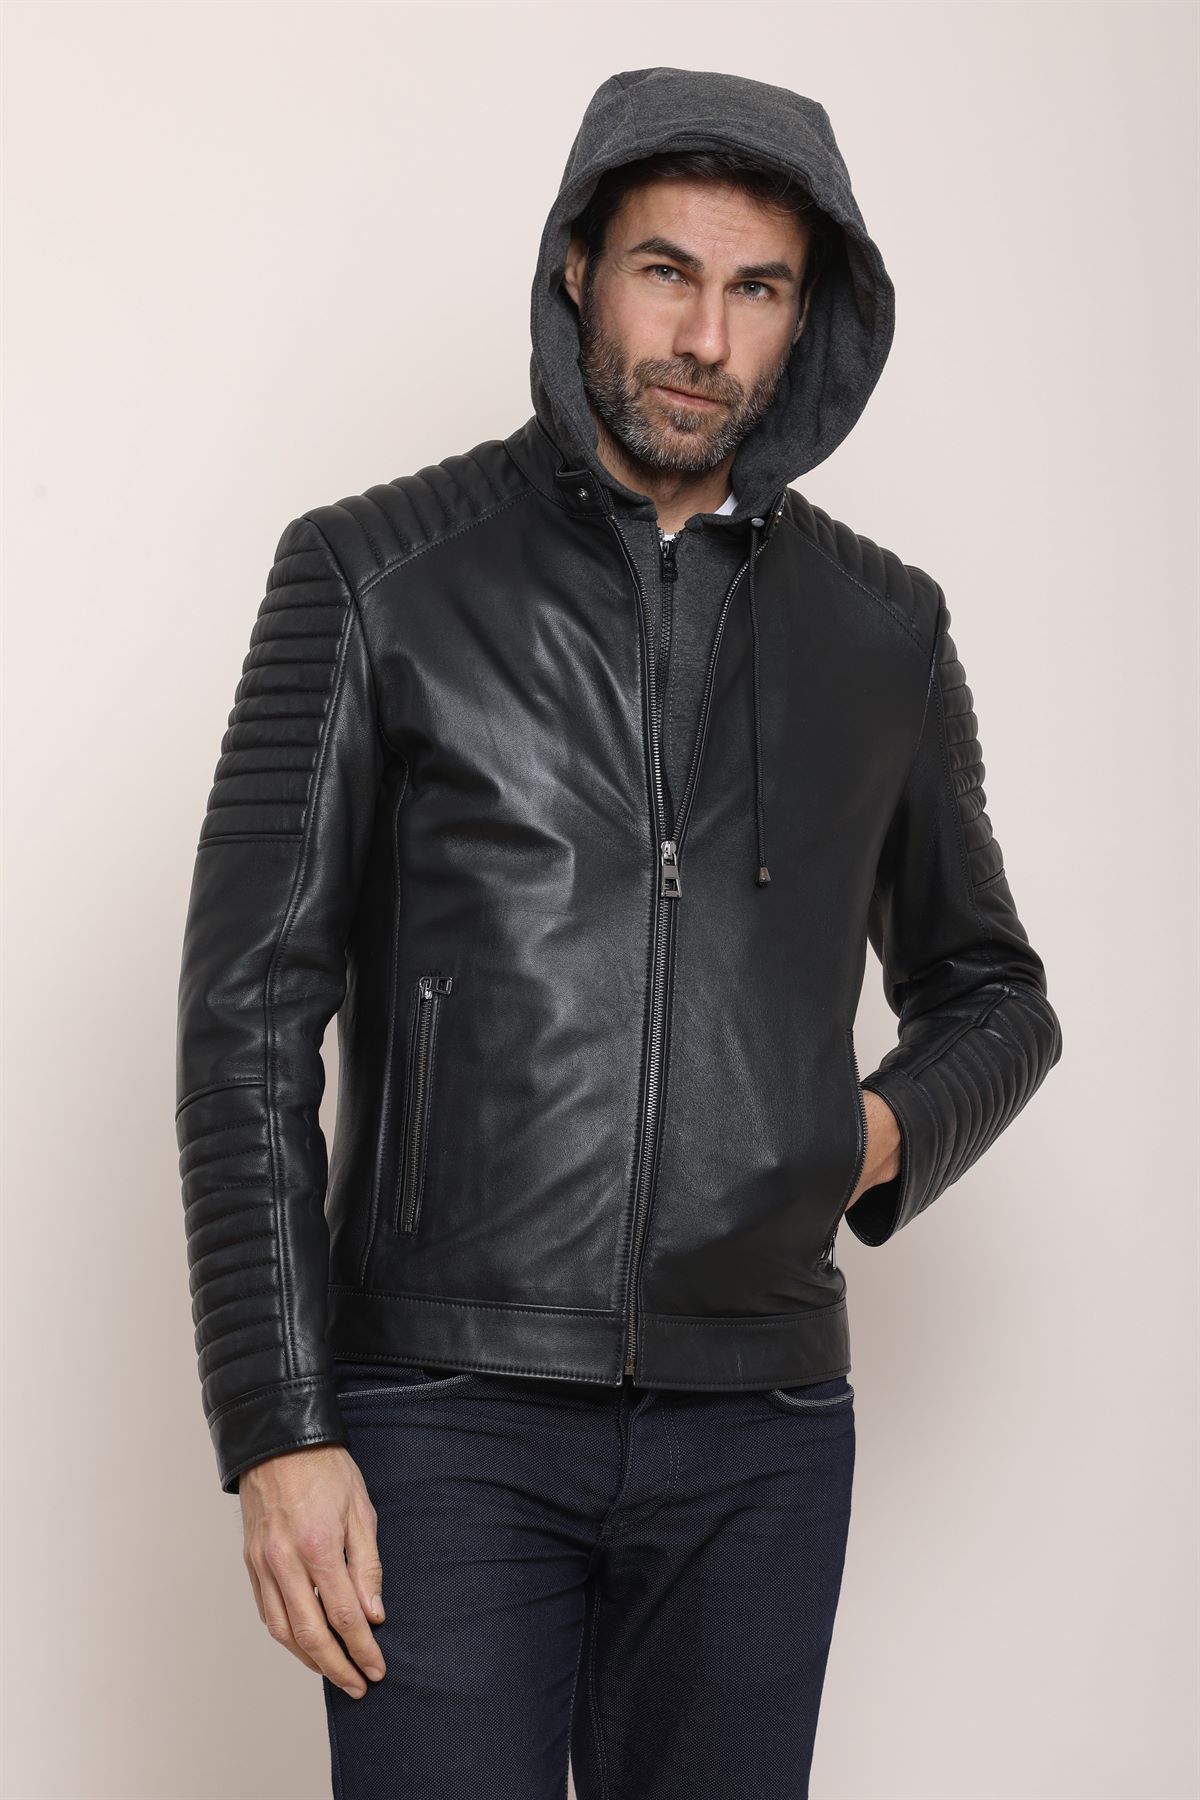 Picture of Men's black leather jacket